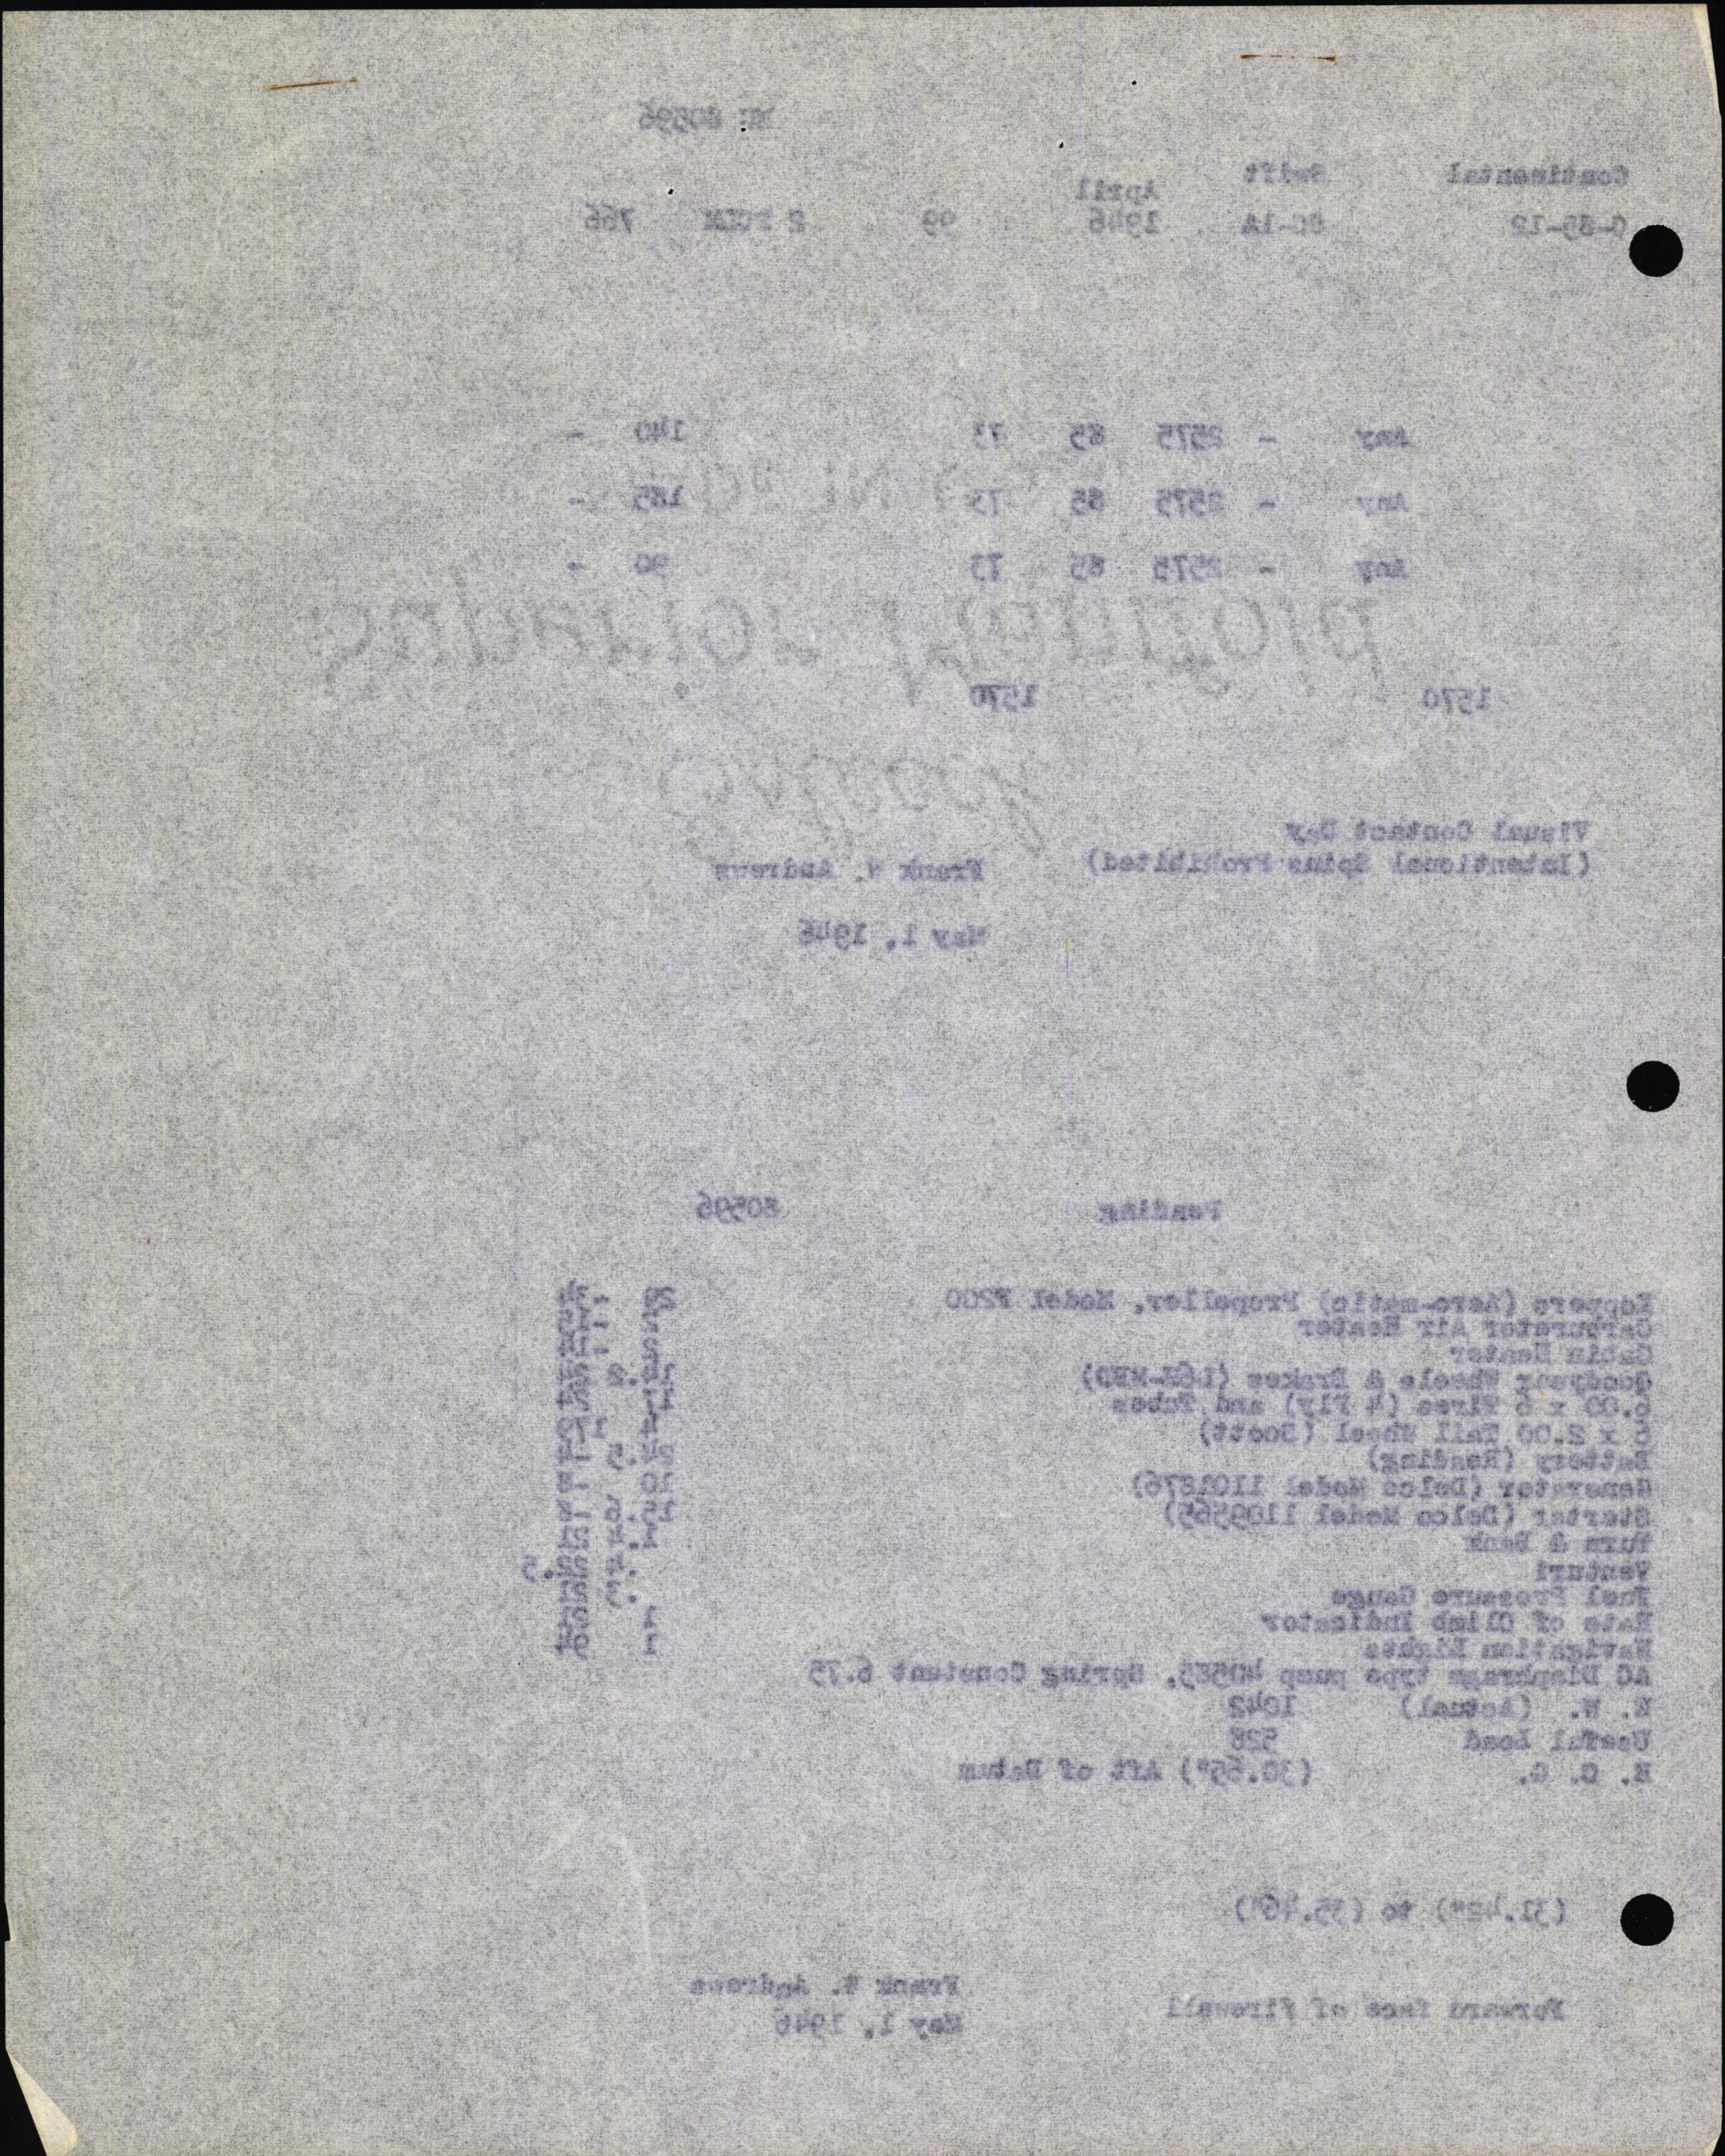 Sample page 10 from AirCorps Library document: Technical Information for Serial Number 99